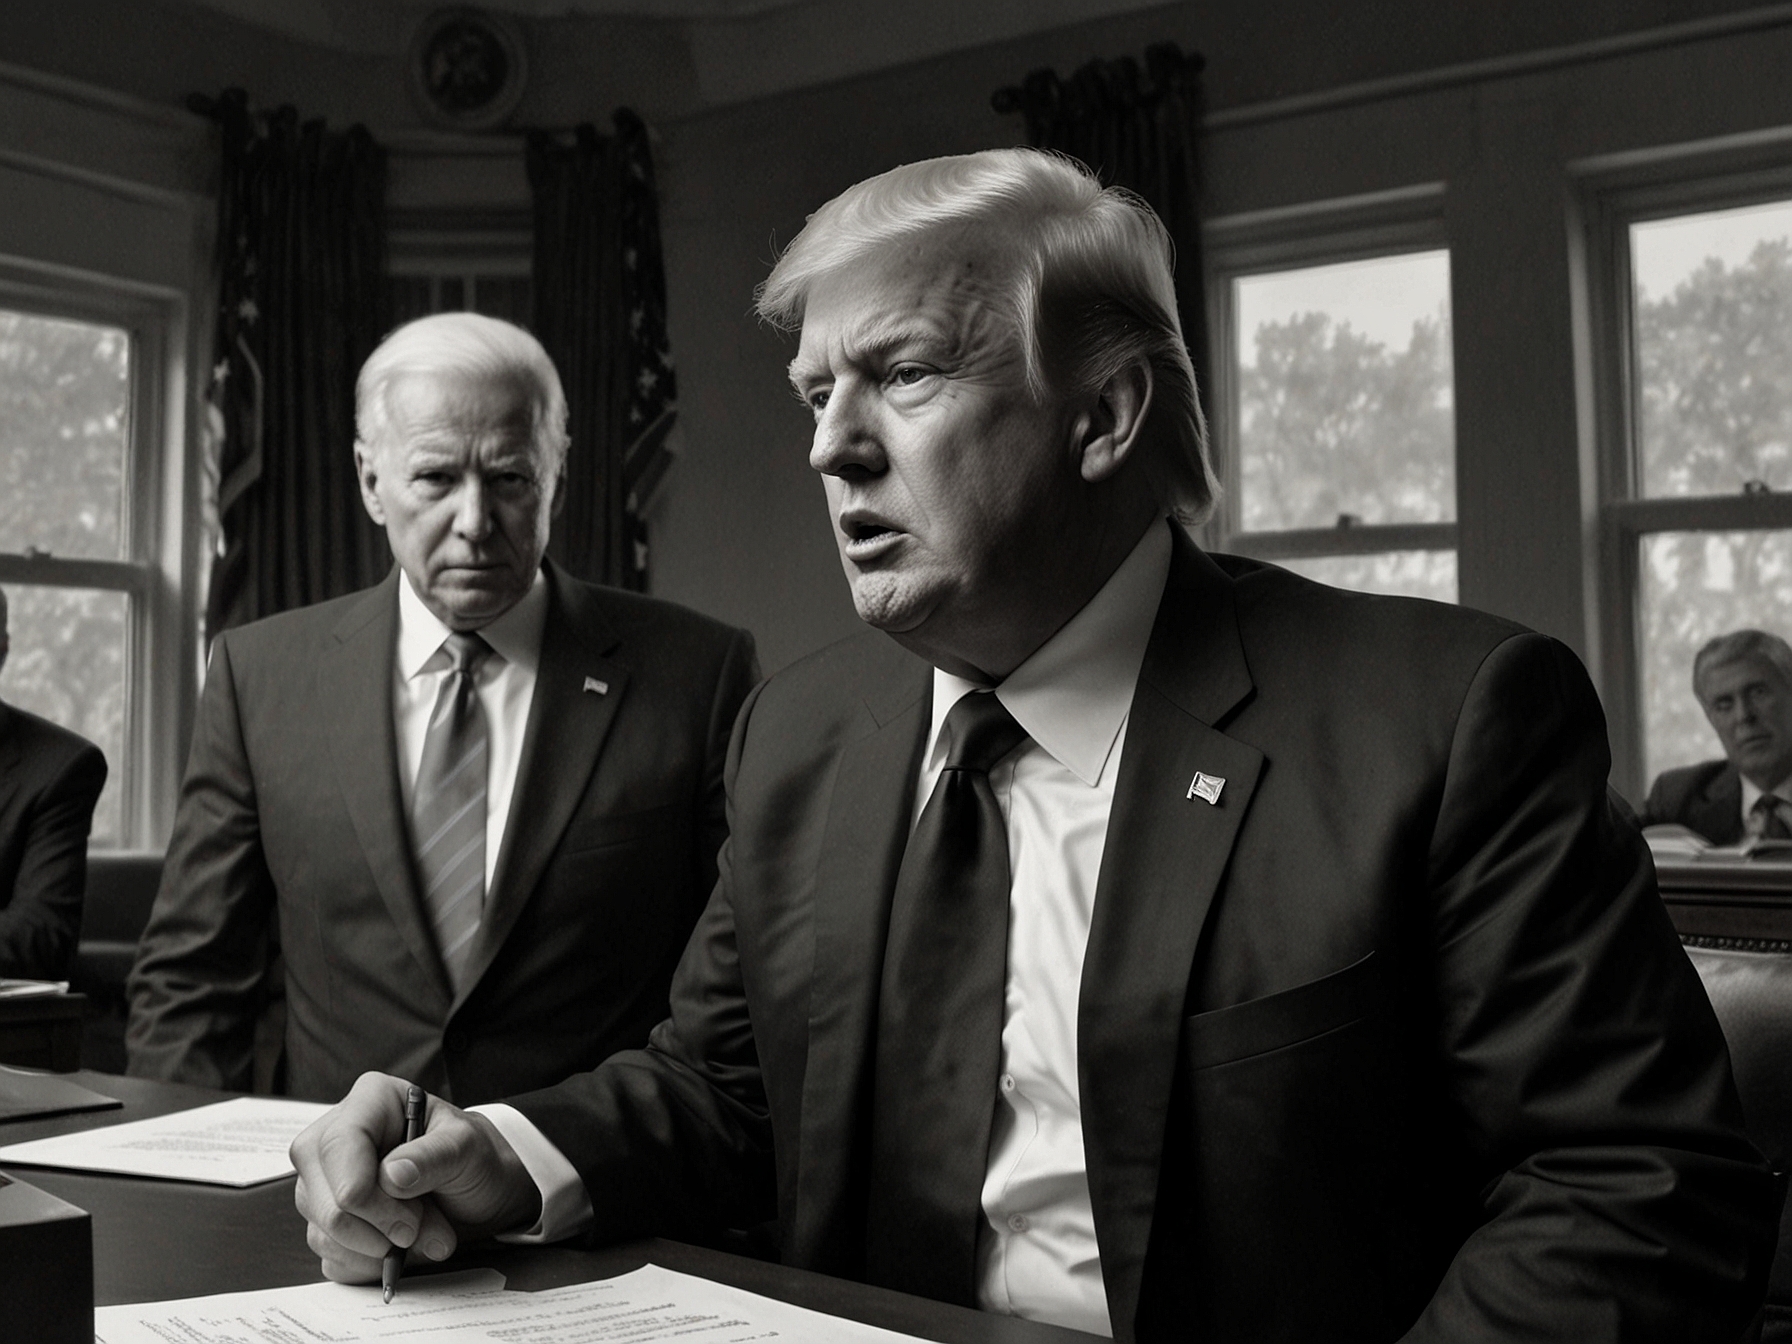 An illustration showing President Trump practicing his debate lines with key advisors, emphasizing his combative and unorthodox style to prepare for targeted attacks on Biden.